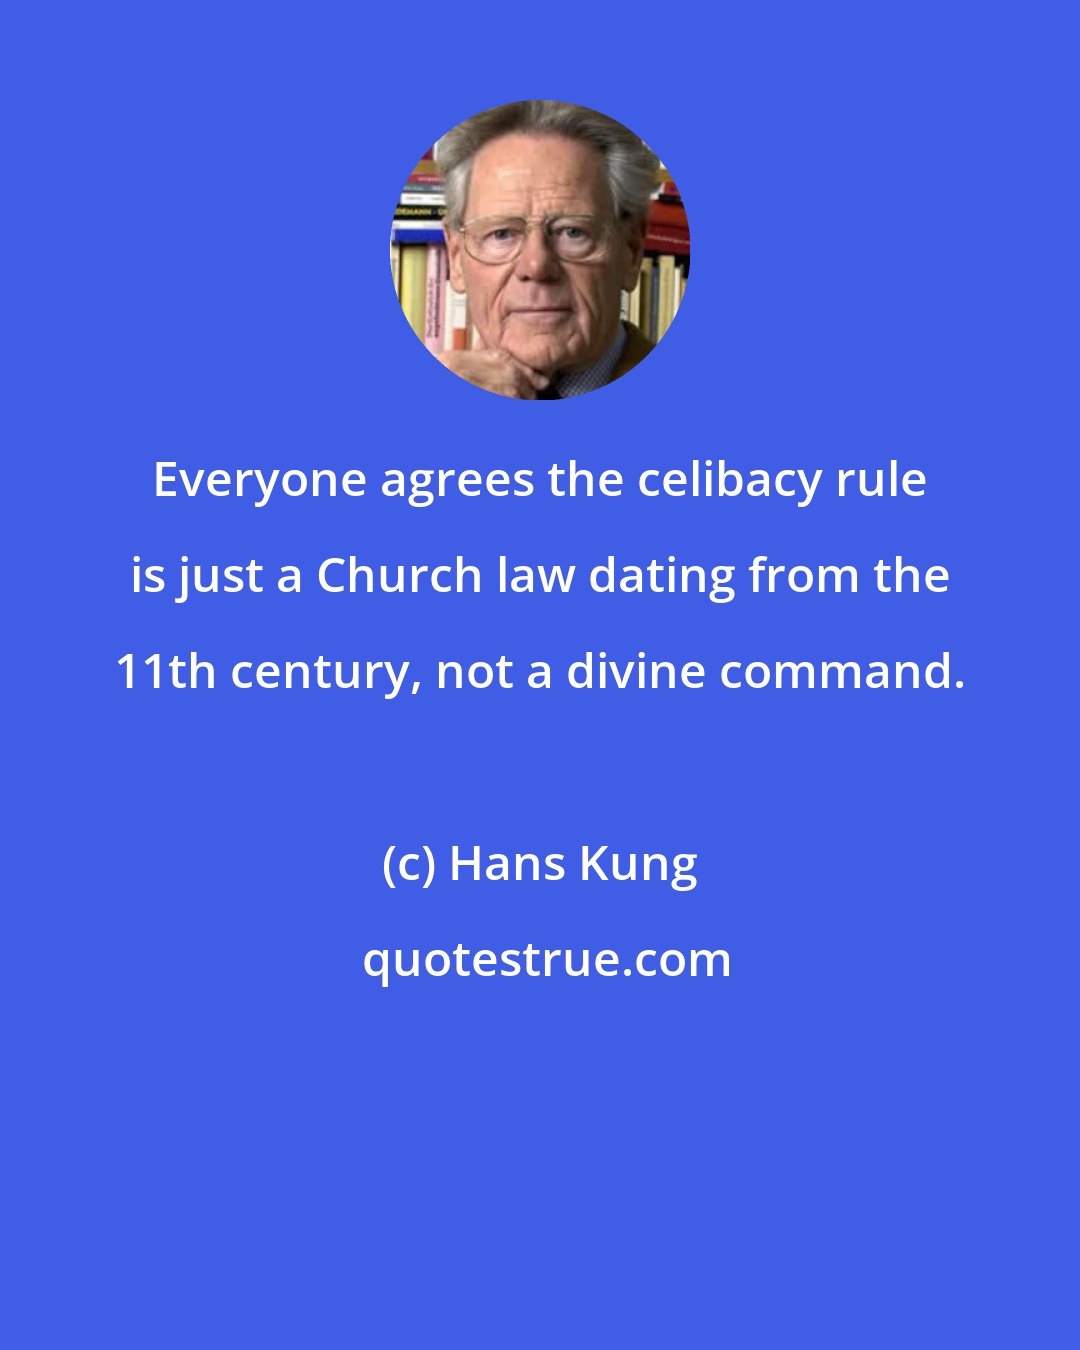 Hans Kung: Everyone agrees the celibacy rule is just a Church law dating from the 11th century, not a divine command.